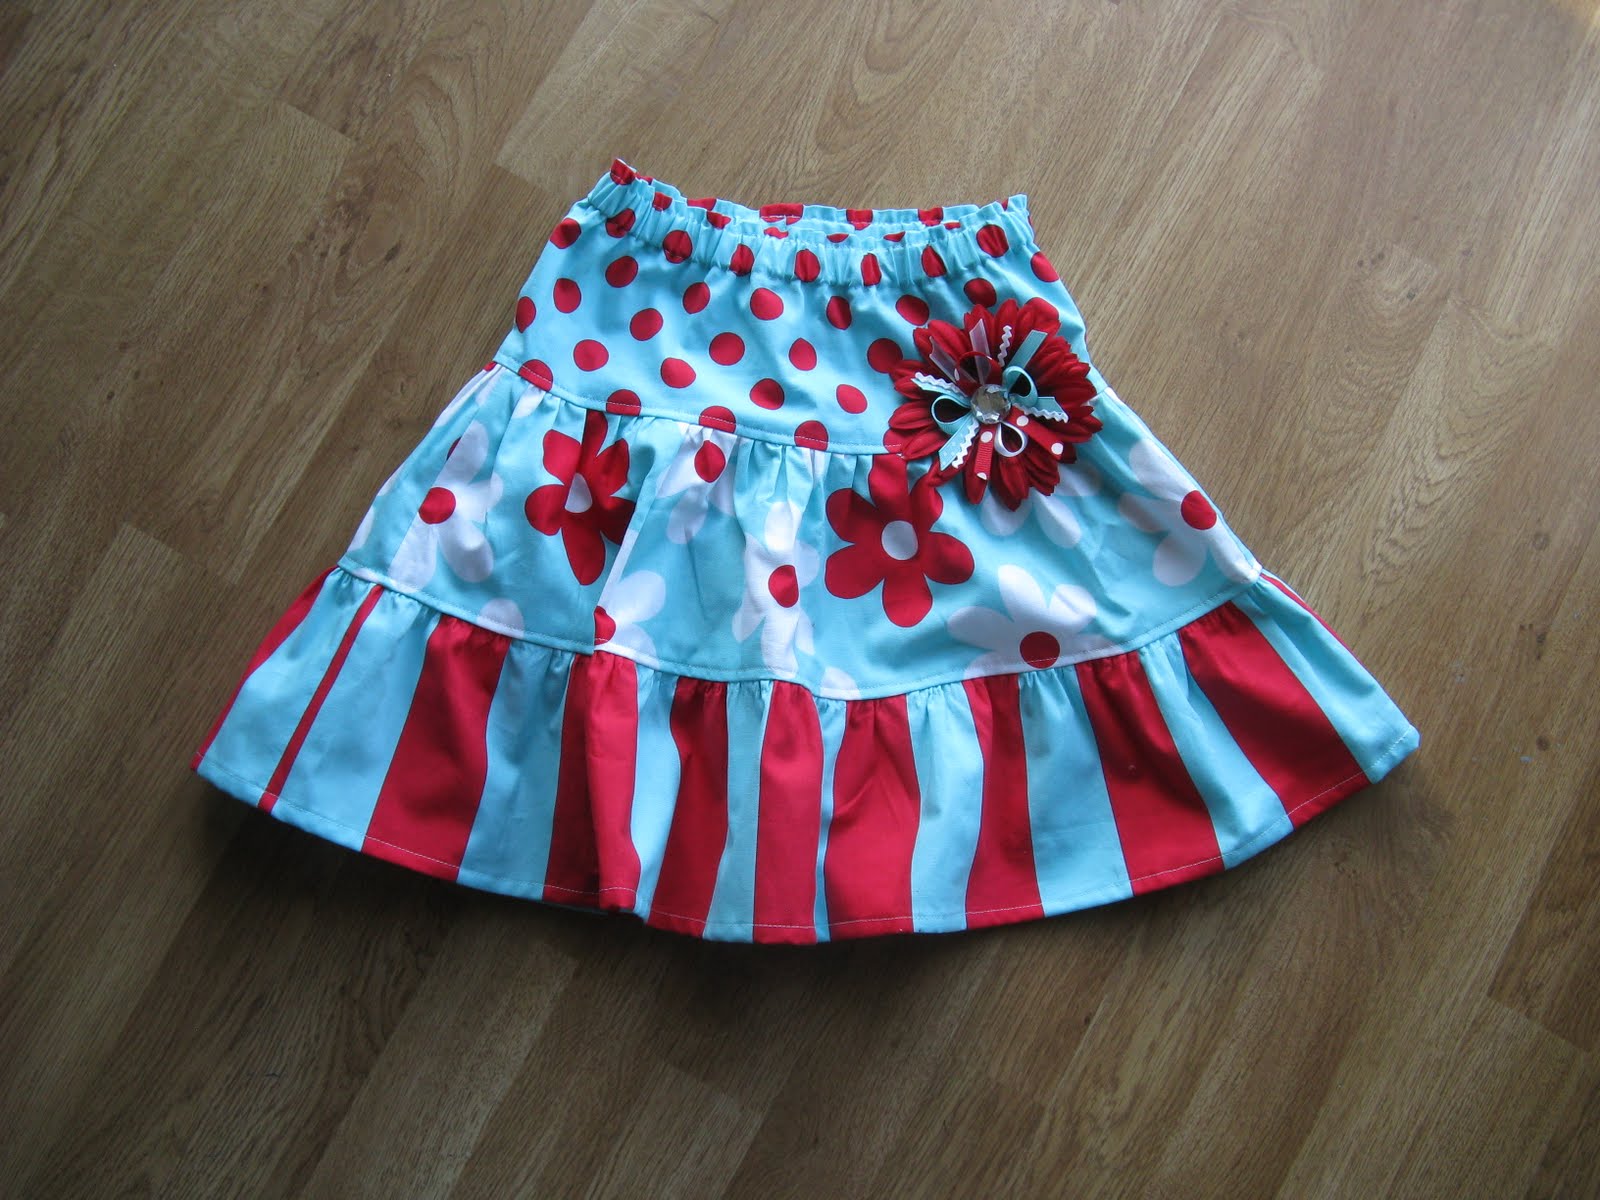 Londy Lou Boutique, LLC: Summer skirts for girls